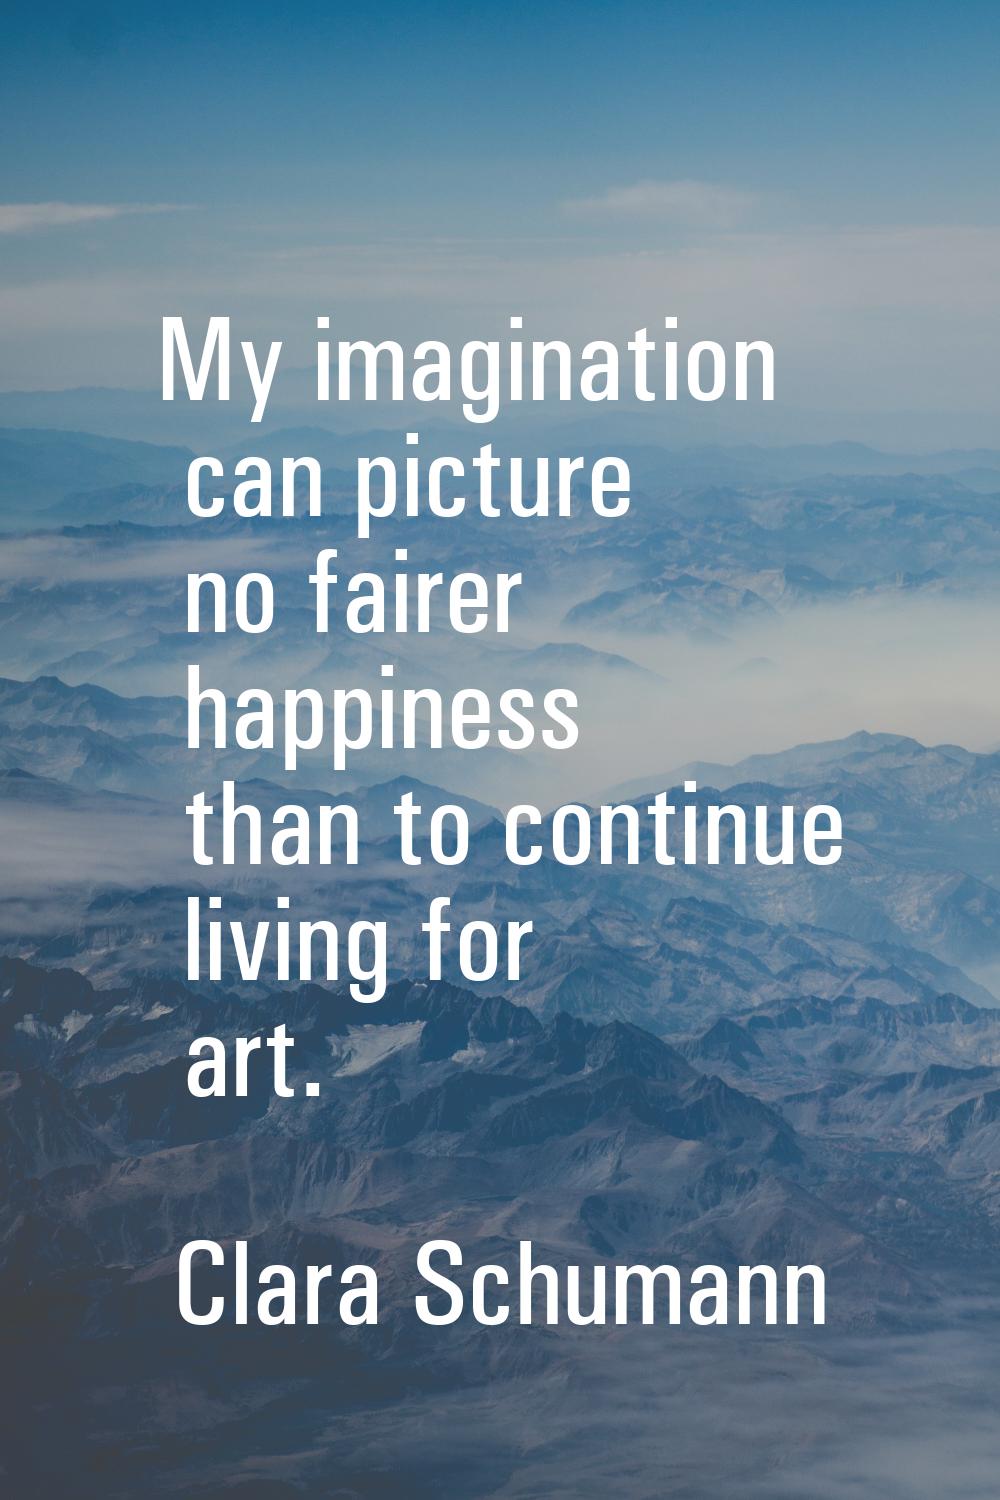 My imagination can picture no fairer happiness than to continue living for art.